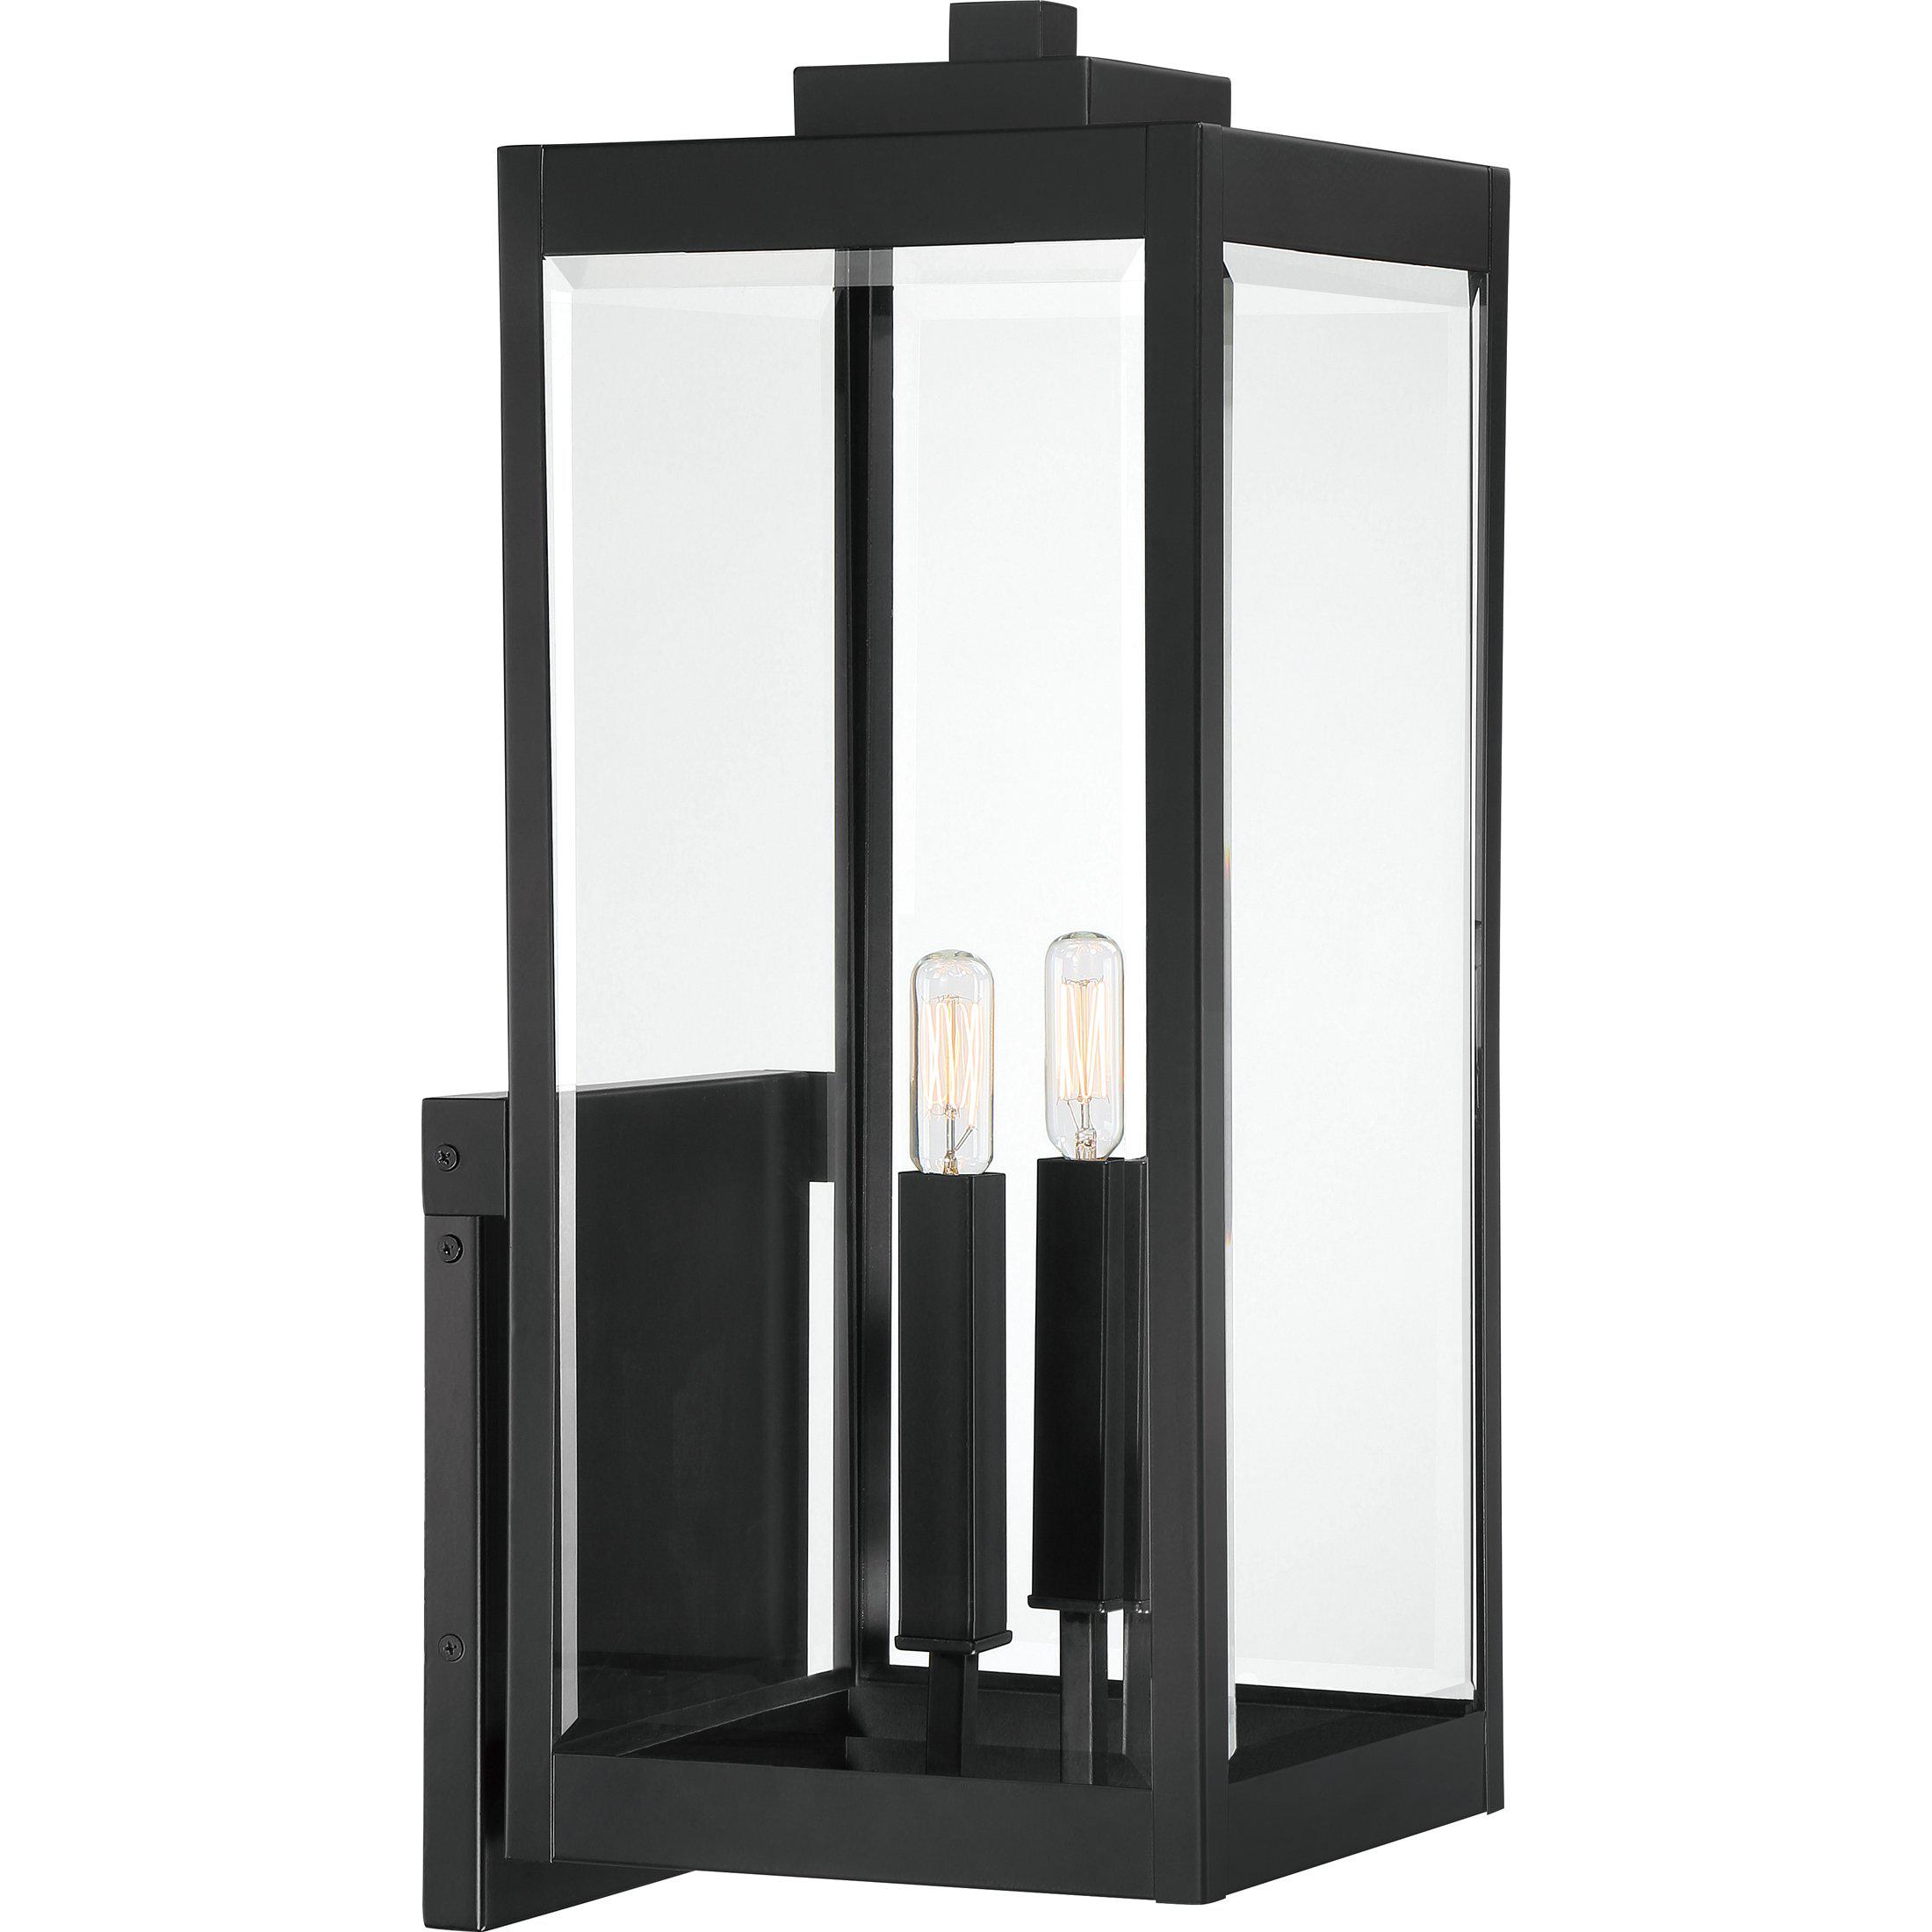 Quoizel  Westover Outdoor Lantern, XL Outdoor l Wall Quoizel Earth Black  